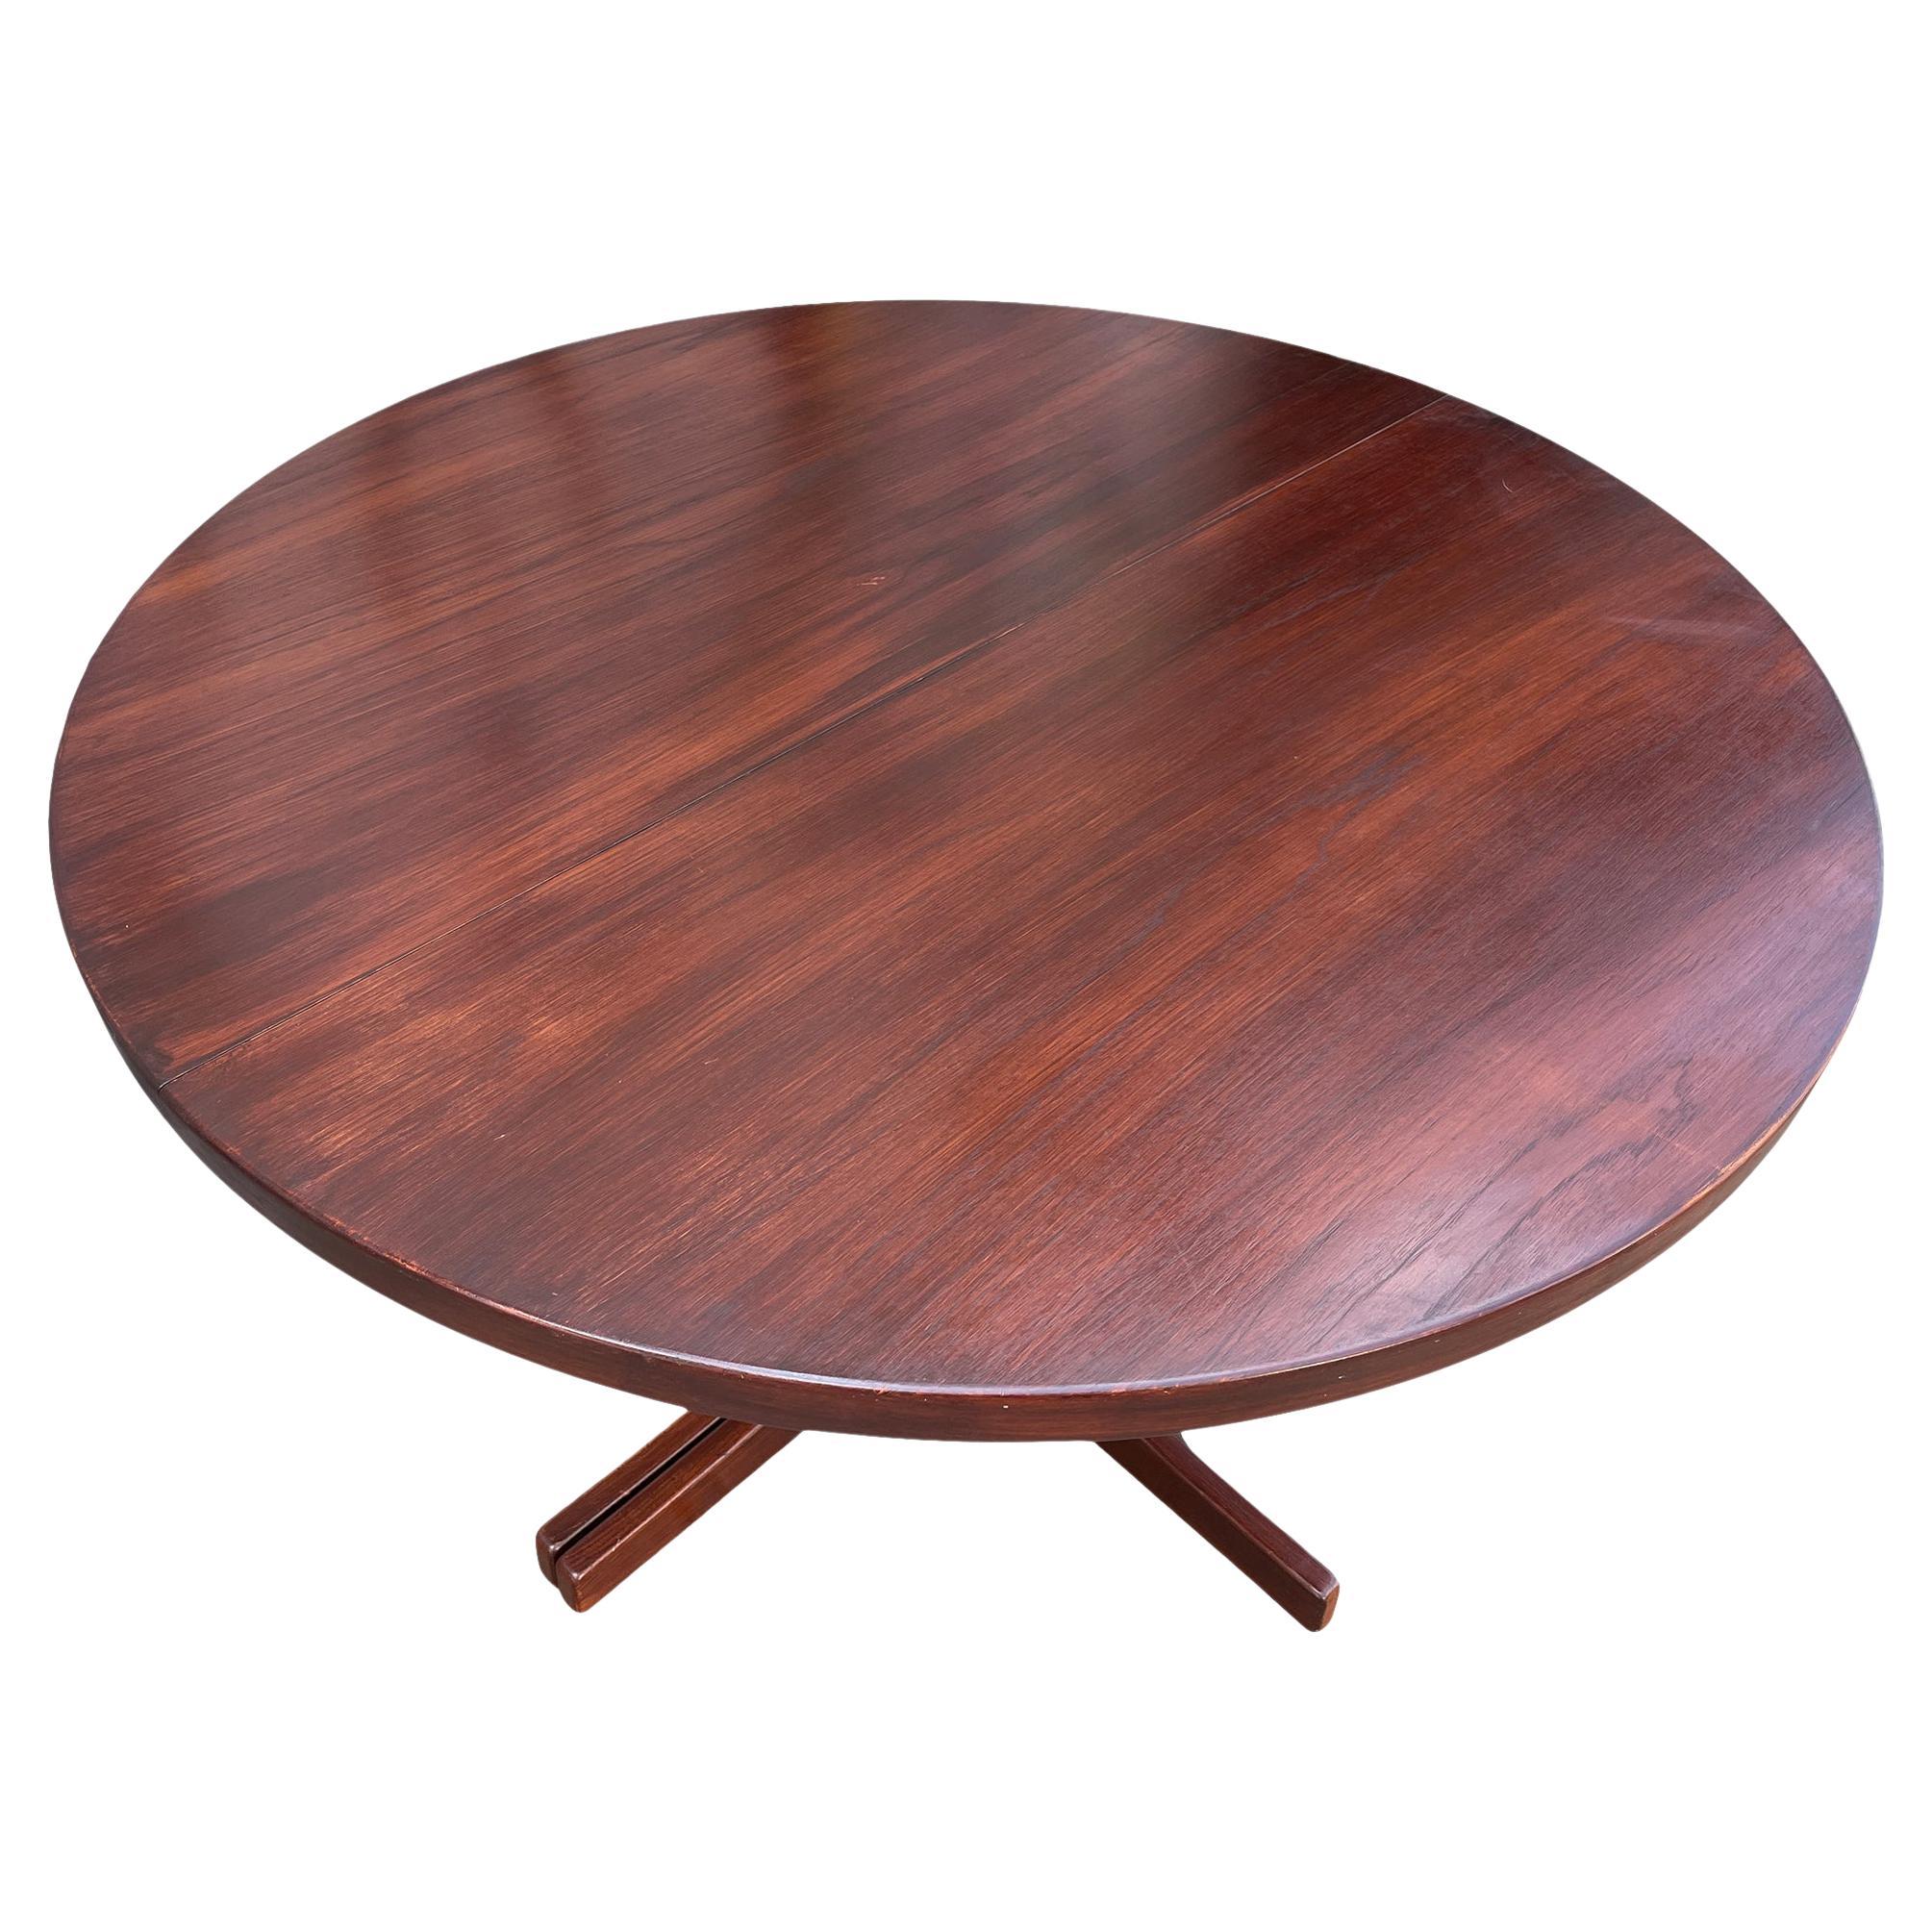 Midcentury teak round Danish Modern extension dining table with (2) leaves. This table has Solid curved flat wood legs and the table is in great vintage condition. Both leaves match the tables finish 100% - table Comes with (2) leaves total.